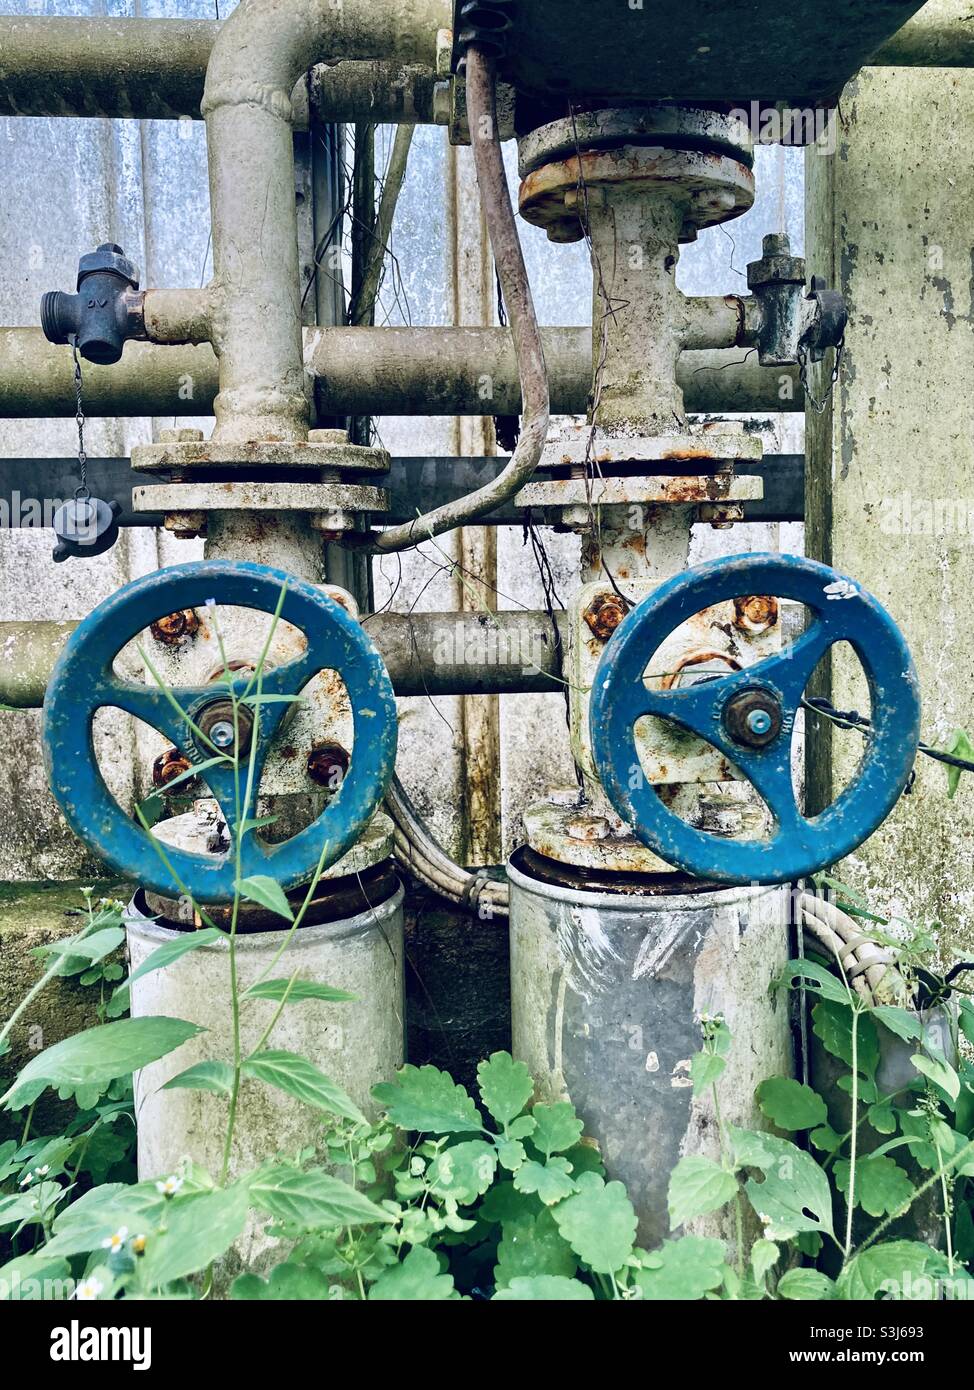 Steam control valves overgrown by plants Stock Photo